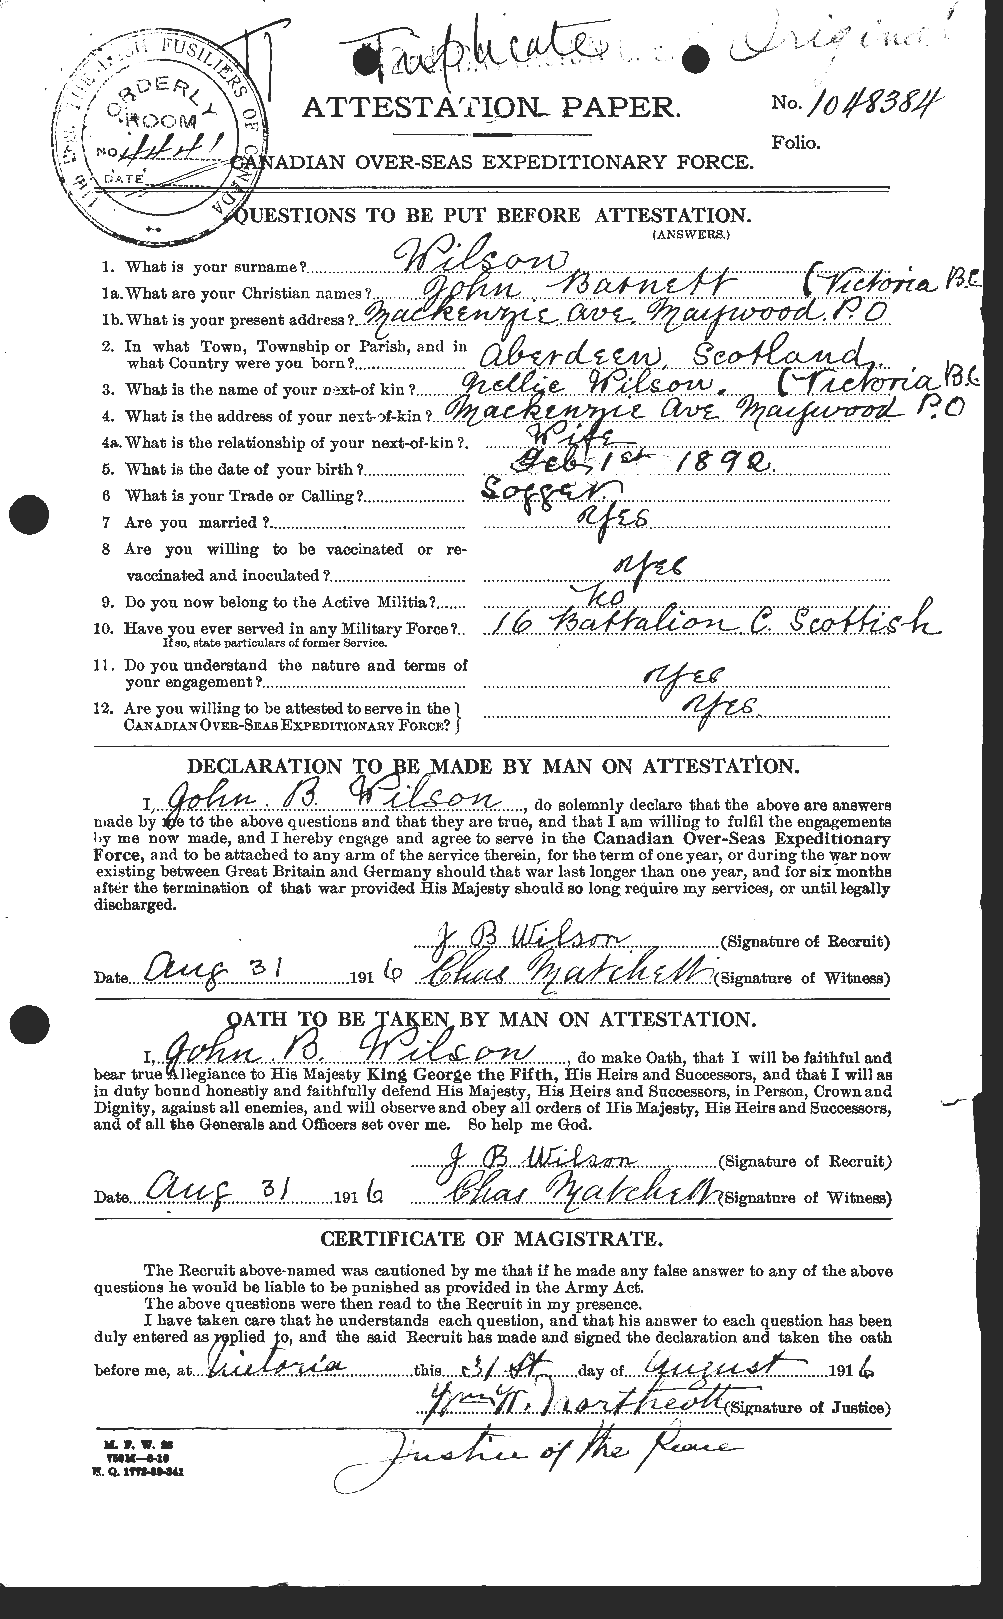 Personnel Records of the First World War - CEF 681668a